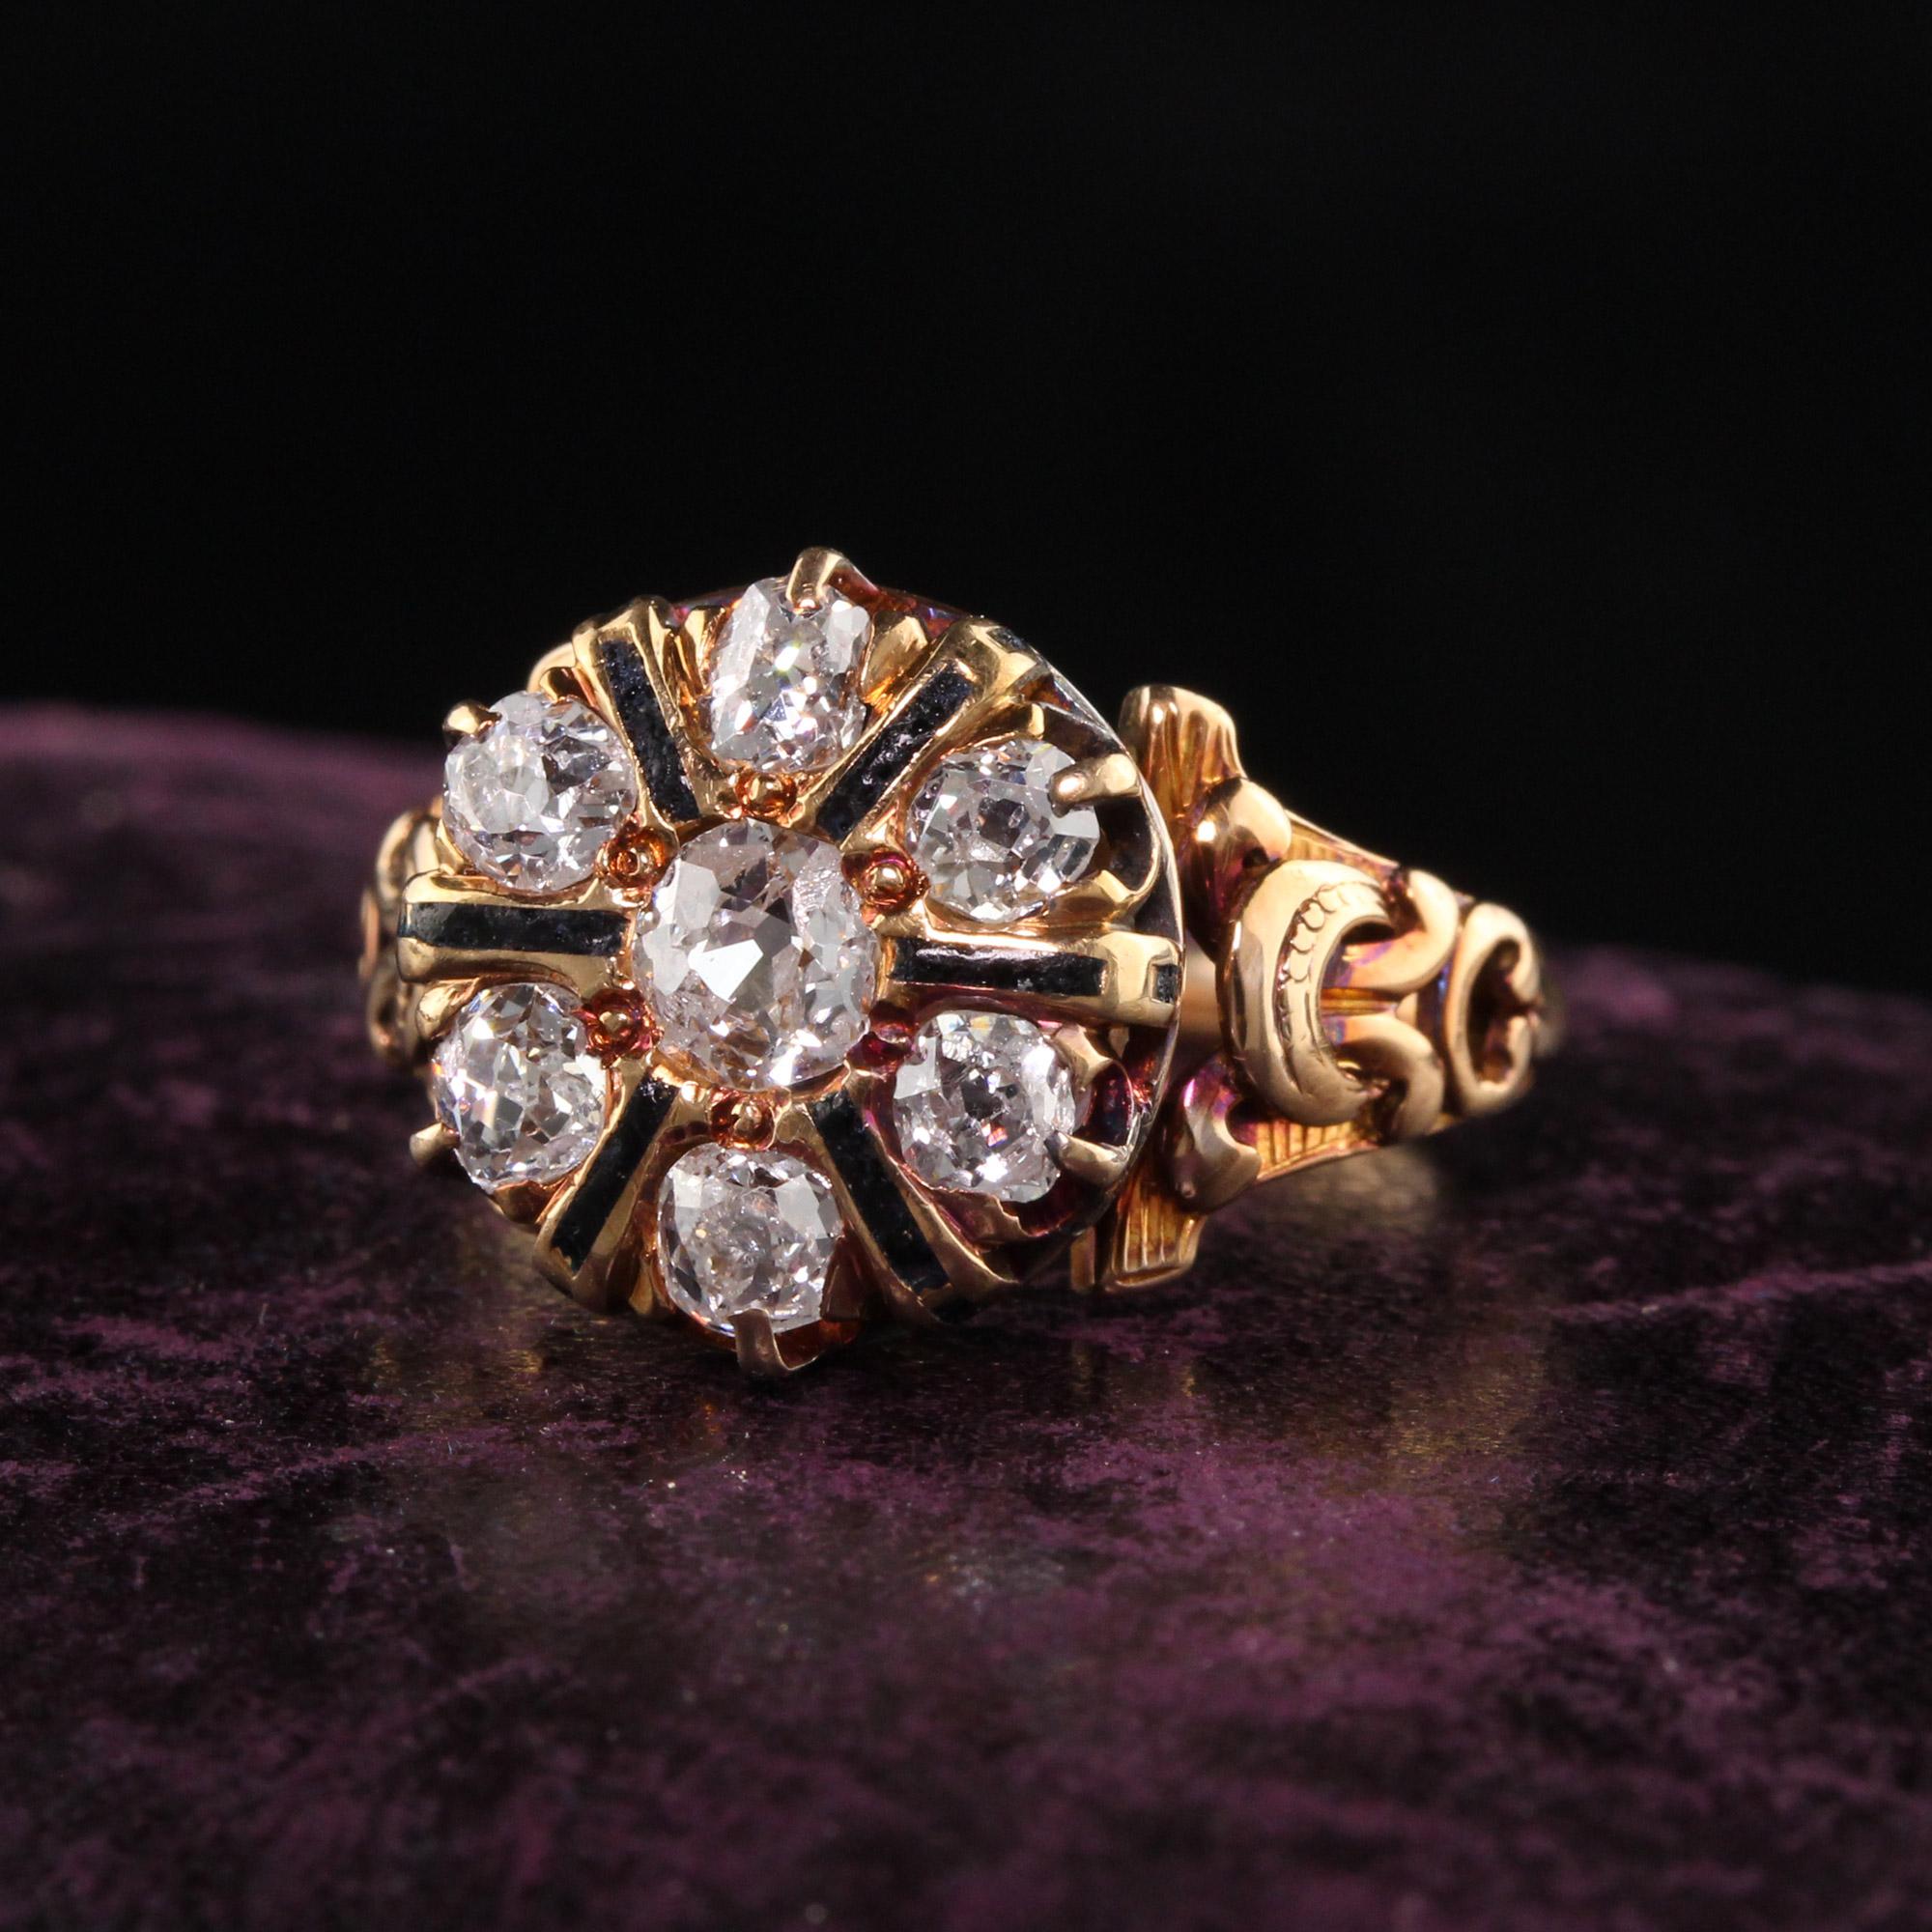 Beautiful Antique Victorian 14K Yellow Gold Old Mine Diamond and Enamel Ring. This gorgeous ring has 7 old mine cut diamonds set in a victorian mounting that has black enamel between each stone. The gold has a rosy patina to it and gives it so much